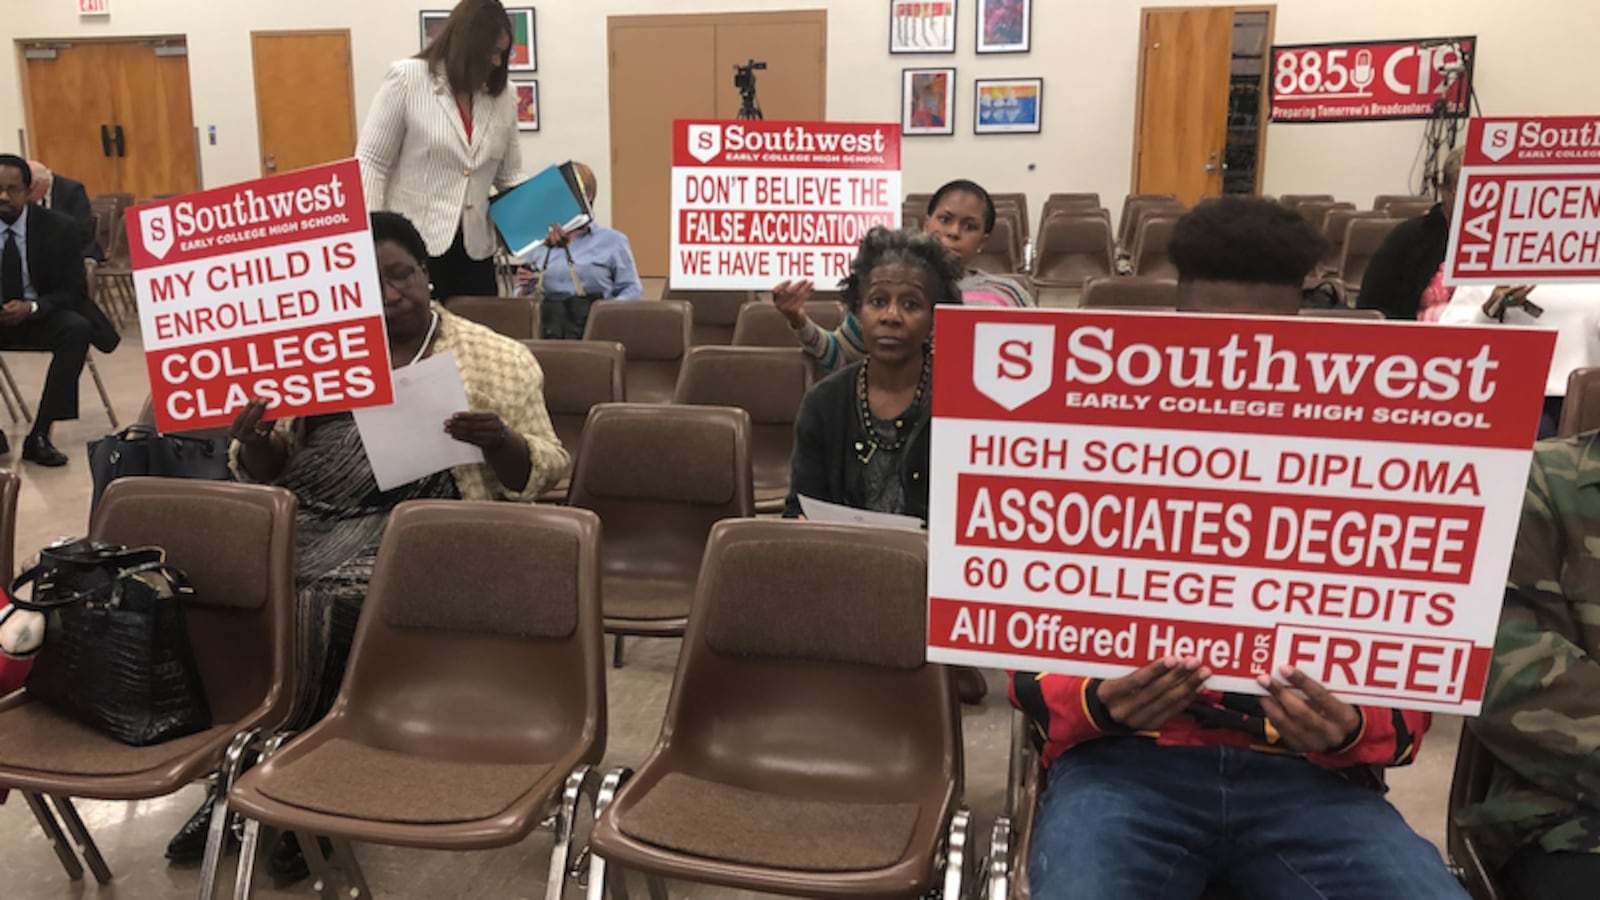 Parents and students protest Shelby County Schools's recommendation to close Southwest Early College High School, which aims to graduate students with associates degrees on top of high school diplomas.